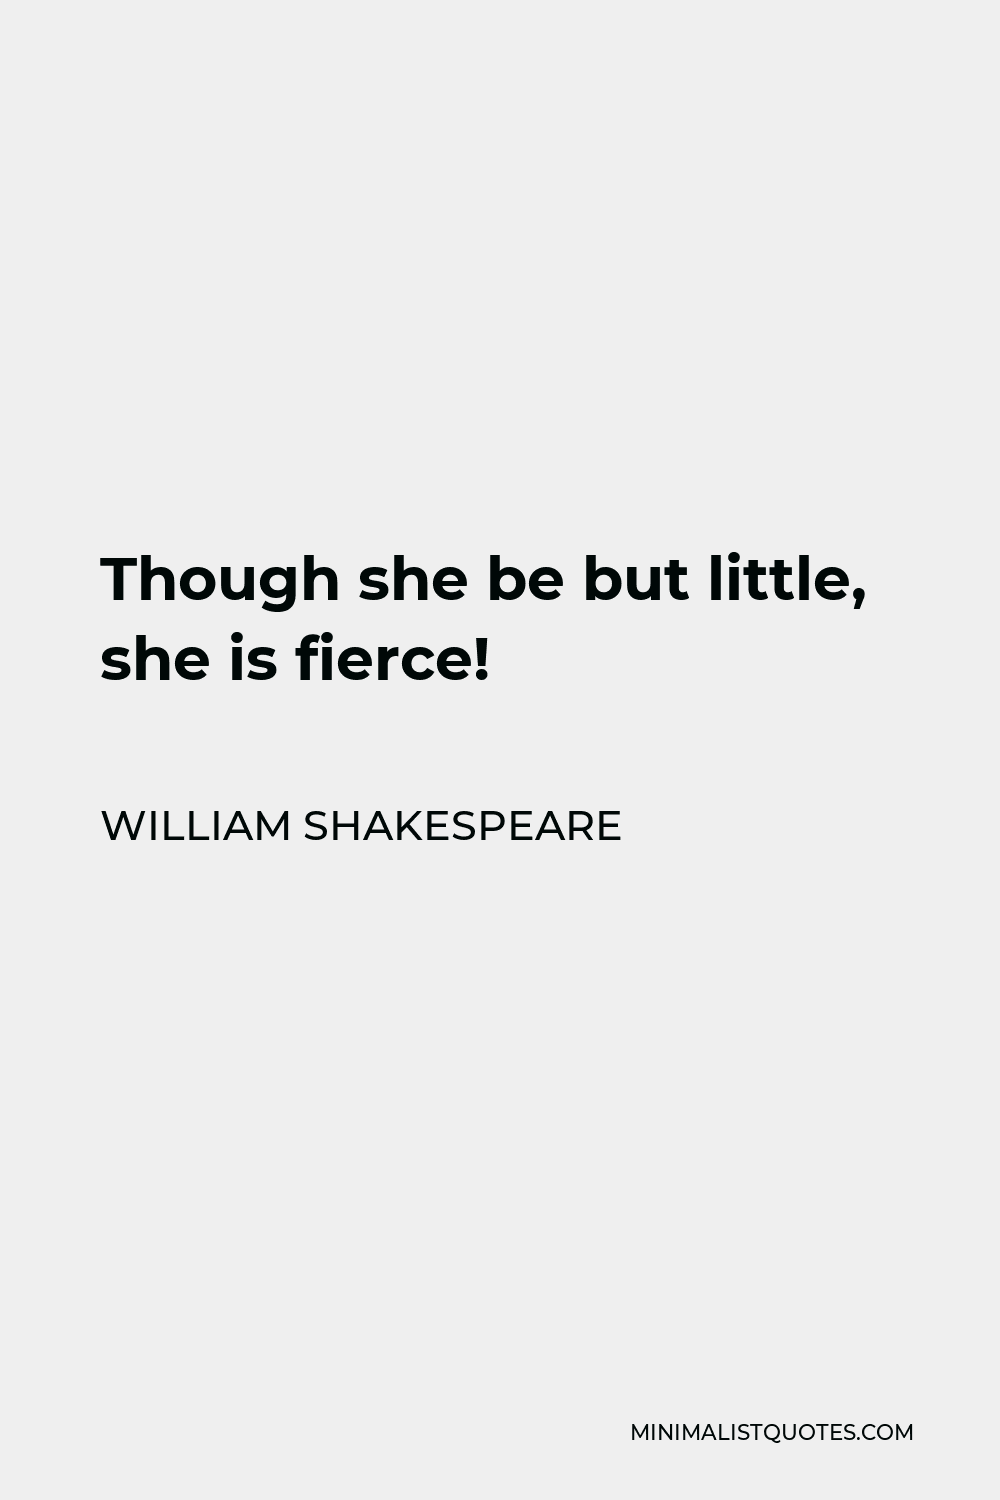 William Shakespeare Quote - Though she be but little, she is fierce!